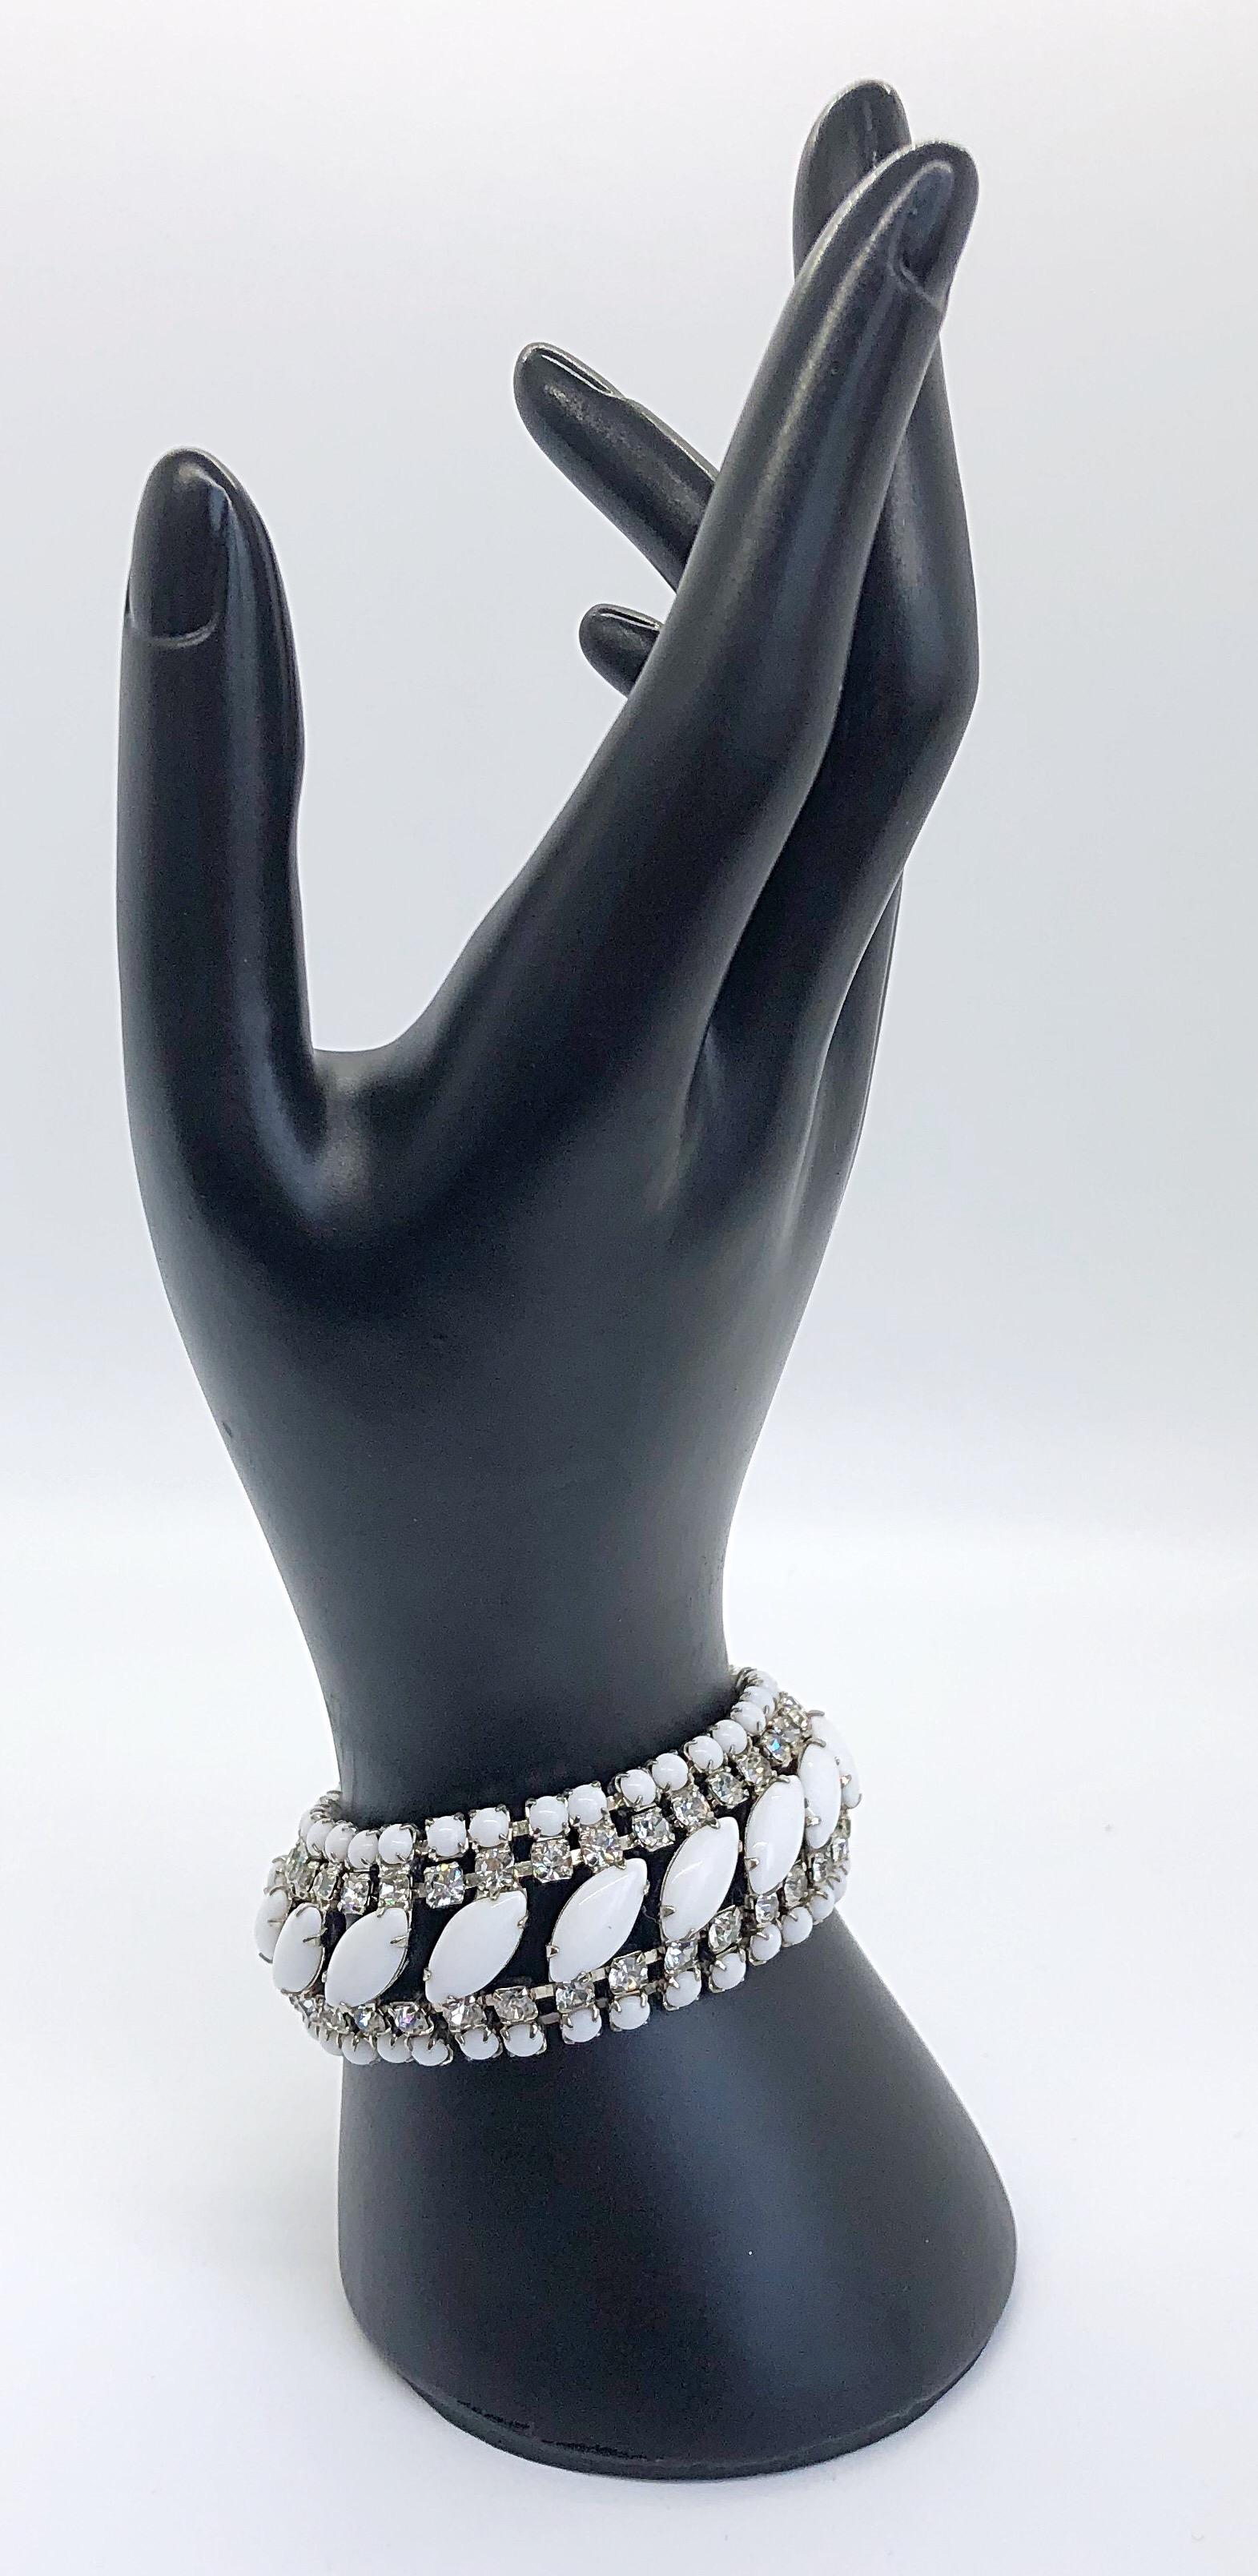 Beautiful vintage 60s rhinestone, white and silver bracelet! Delicate marquise ( navette ) shaped white opaque stones set upon clear sparkly rhinestones. Matching white opaque balls line the rhinestones. Silver link closure. Can easily be dressed up